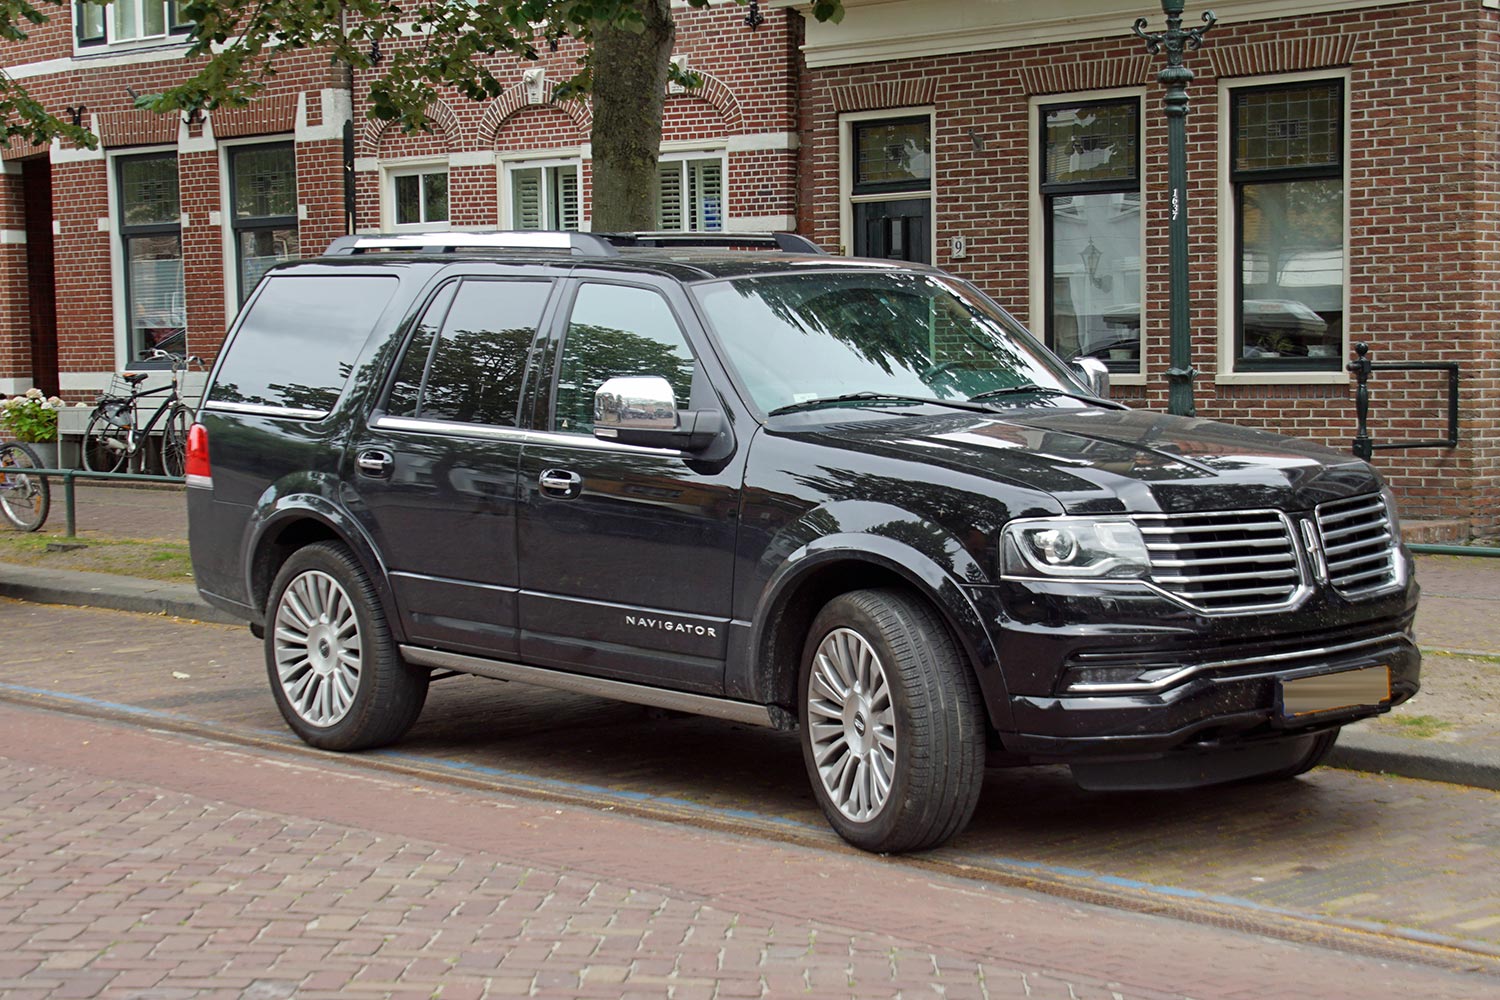 Black Lincoln Navigator parked by the side of the road